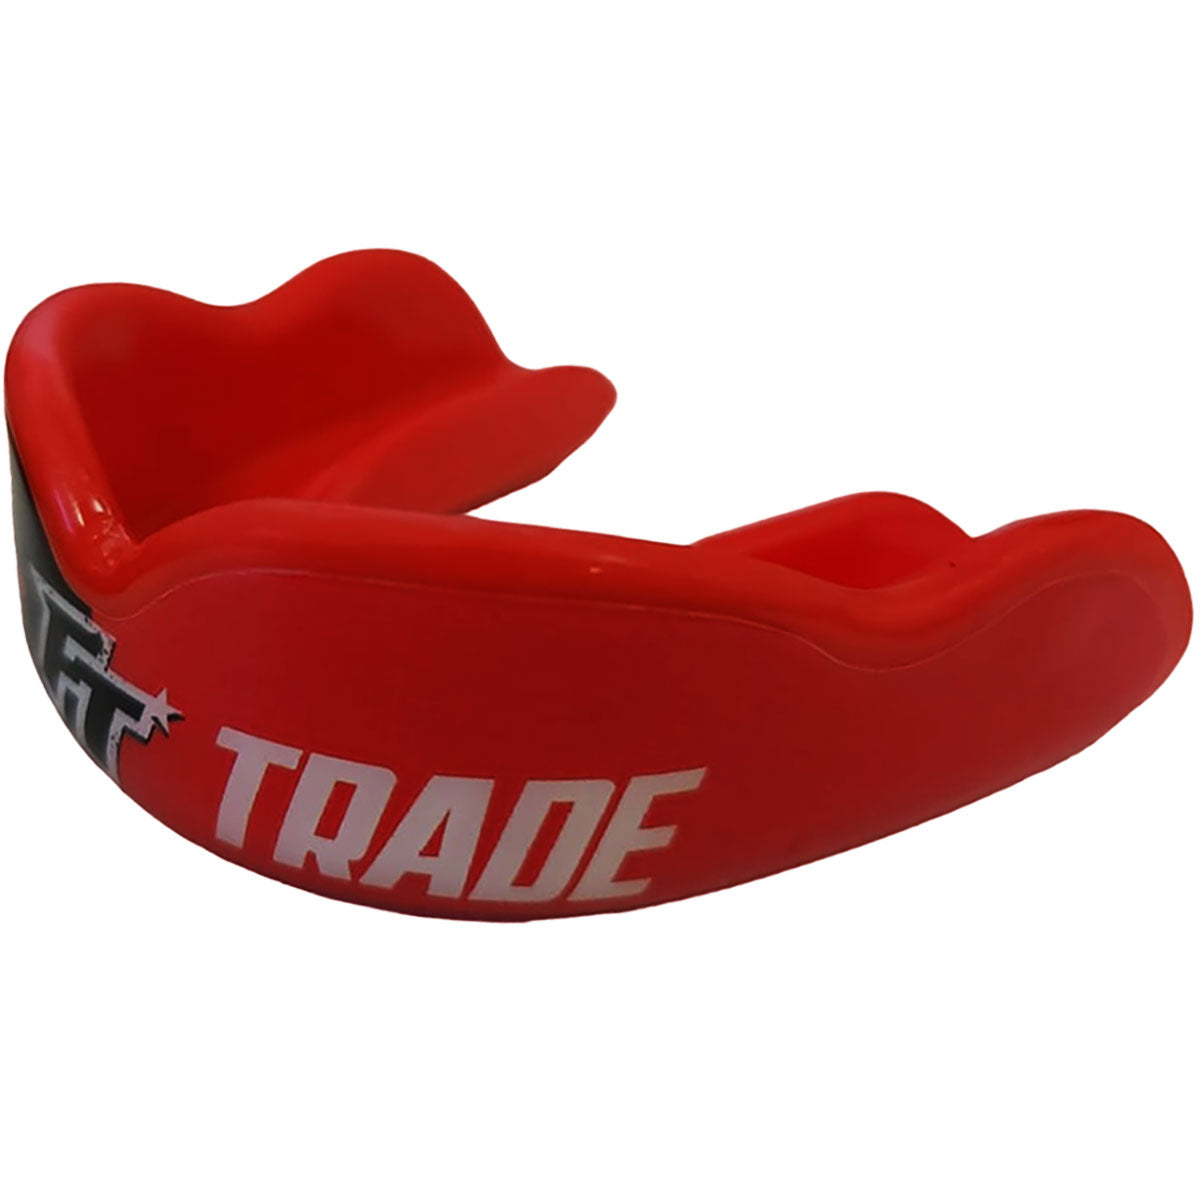 Mouthguard Protected High Impact - "Boil and Bite" Fight Trade Brand Black & Red